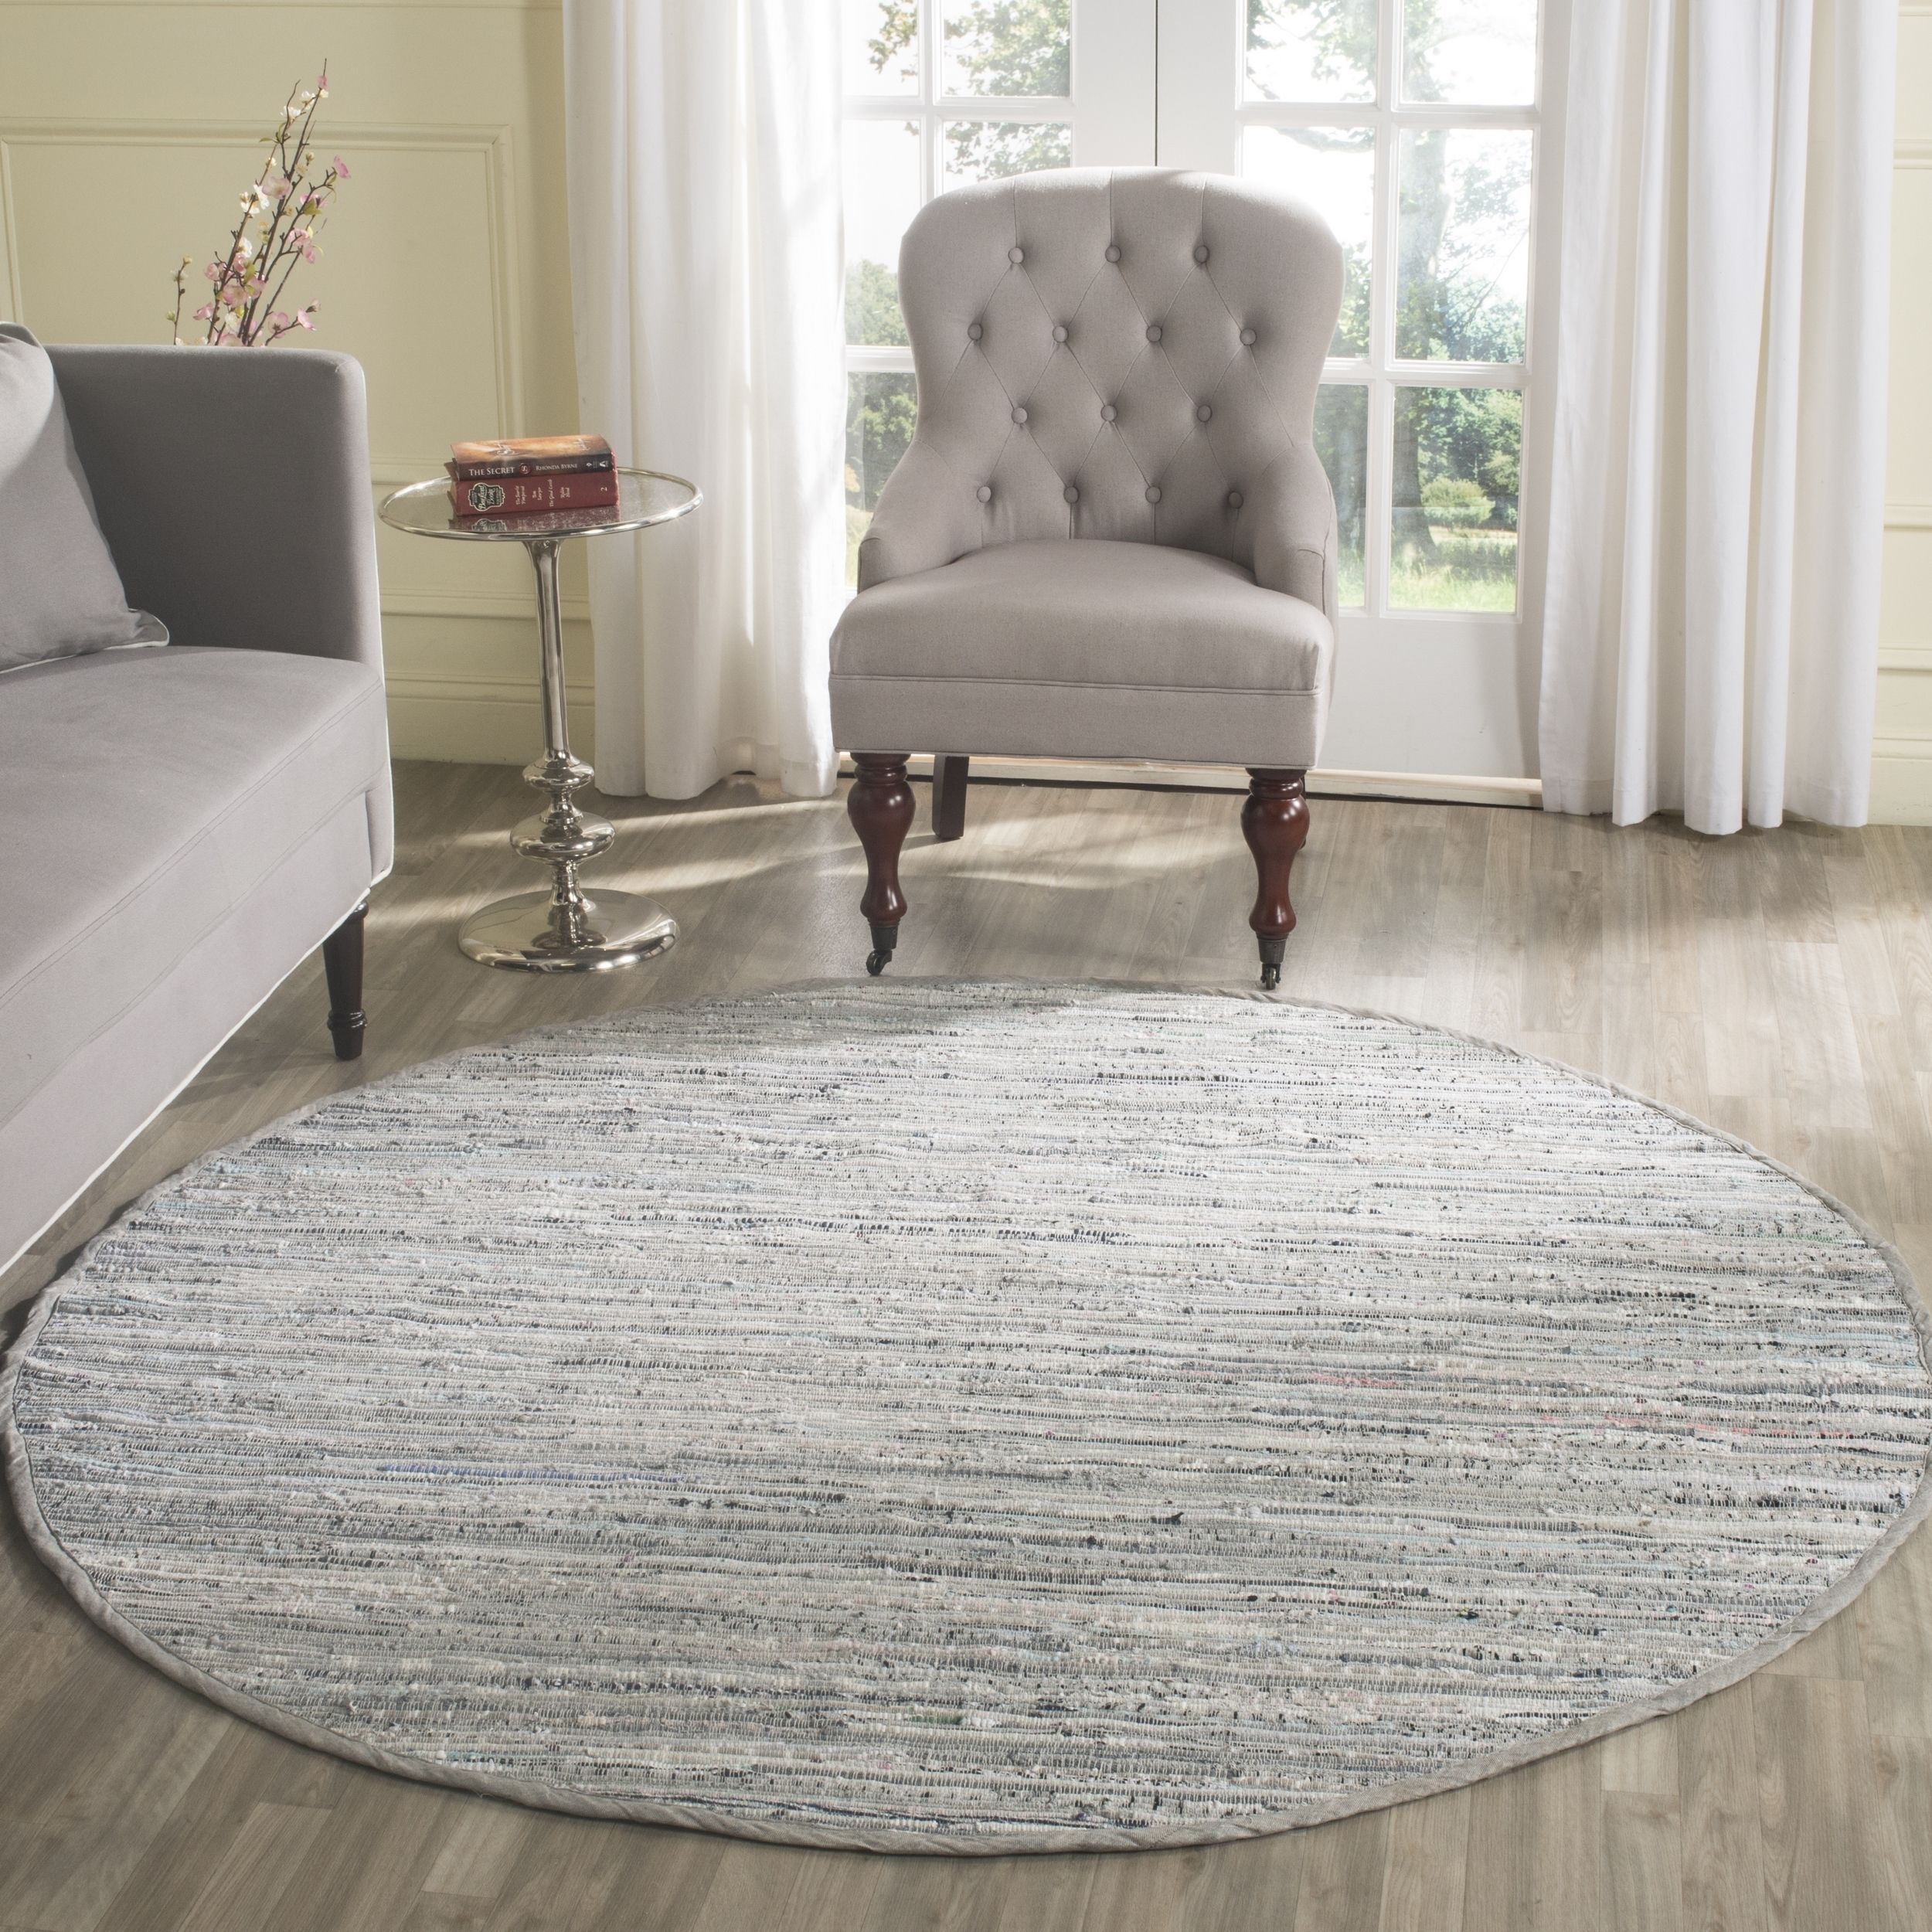 Safavieh Handmade Rag Rug Vistiana Casual Stripe Cotton Rug | Grey With Regard To Gray And Beige Trellis Cylinder Pouf Ottomans (View 3 of 20)